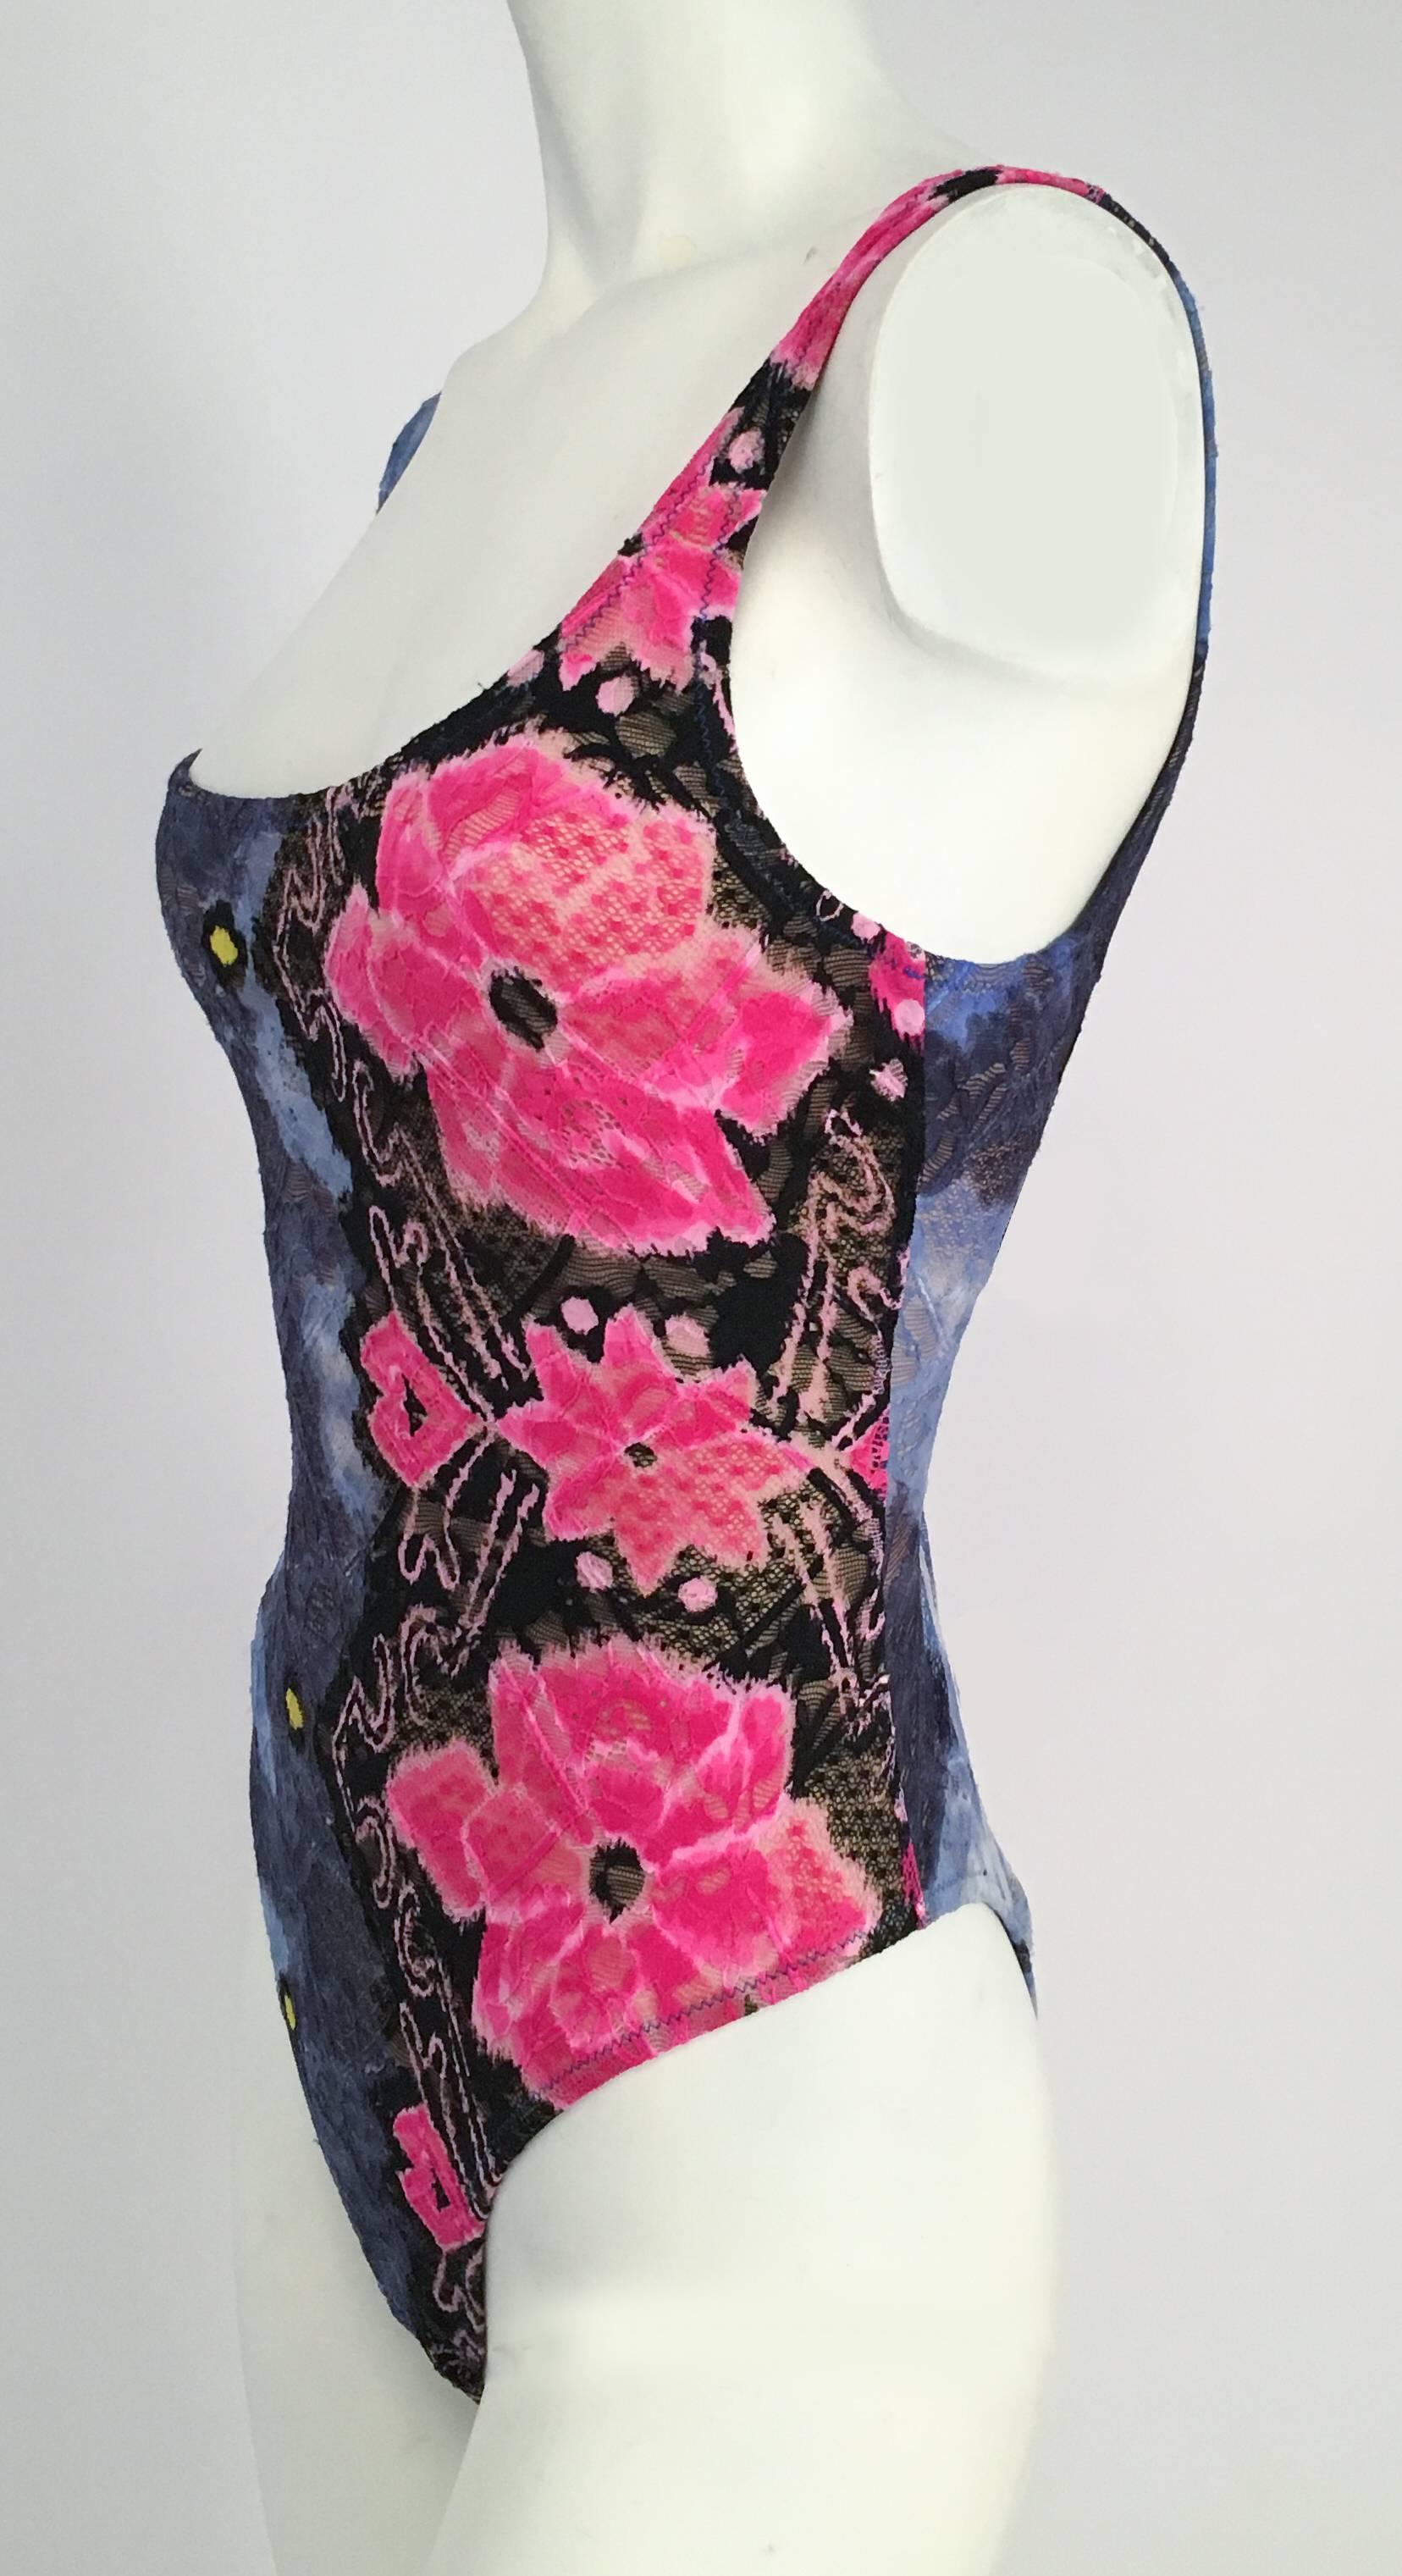 90s Versace Pink and Blue Lace Swimsuit. Stretch lace over nude modesty lining. 